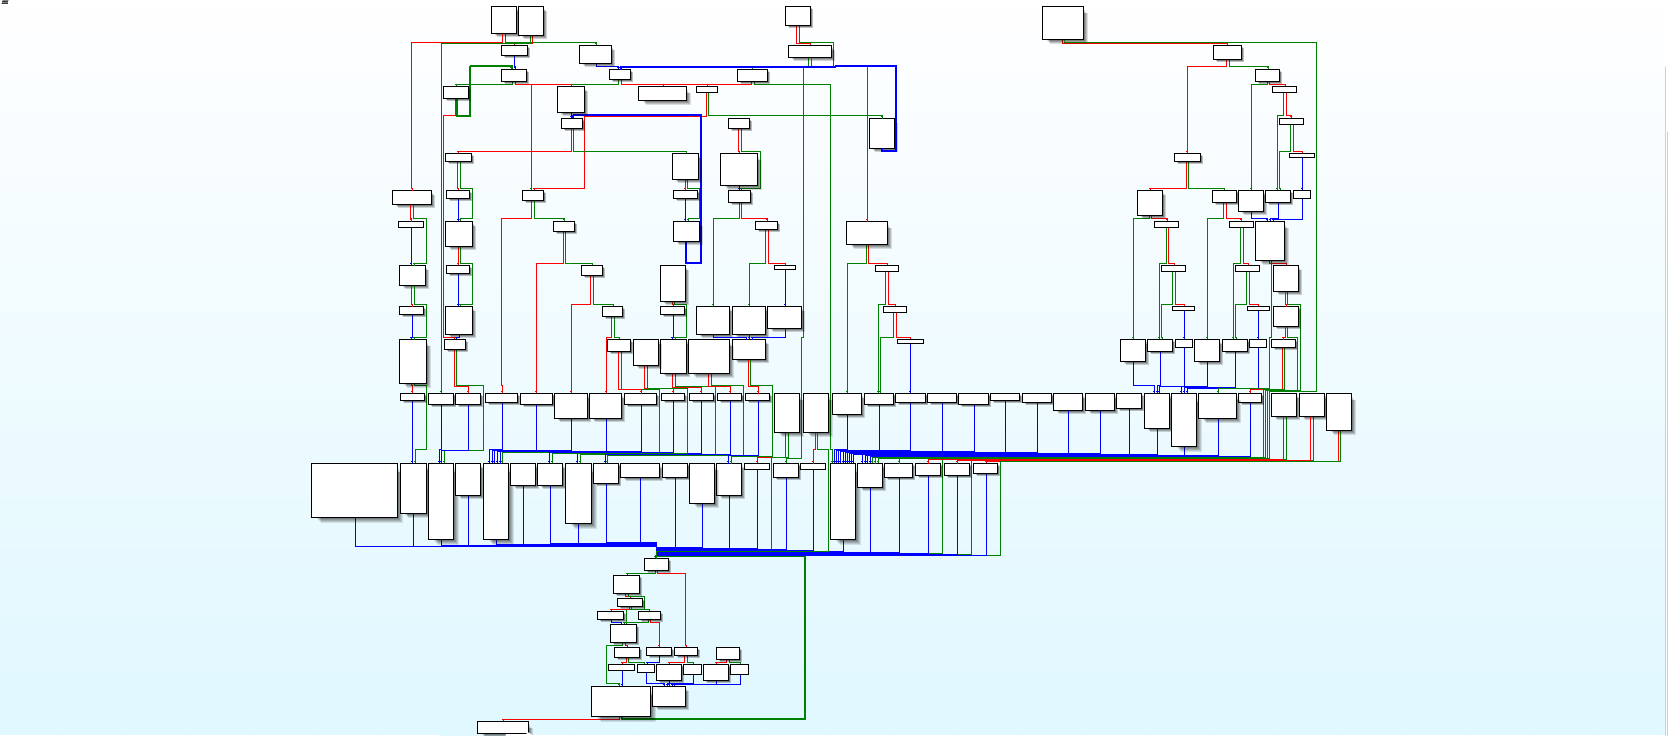 Control flow graph from the IDA disassembly.